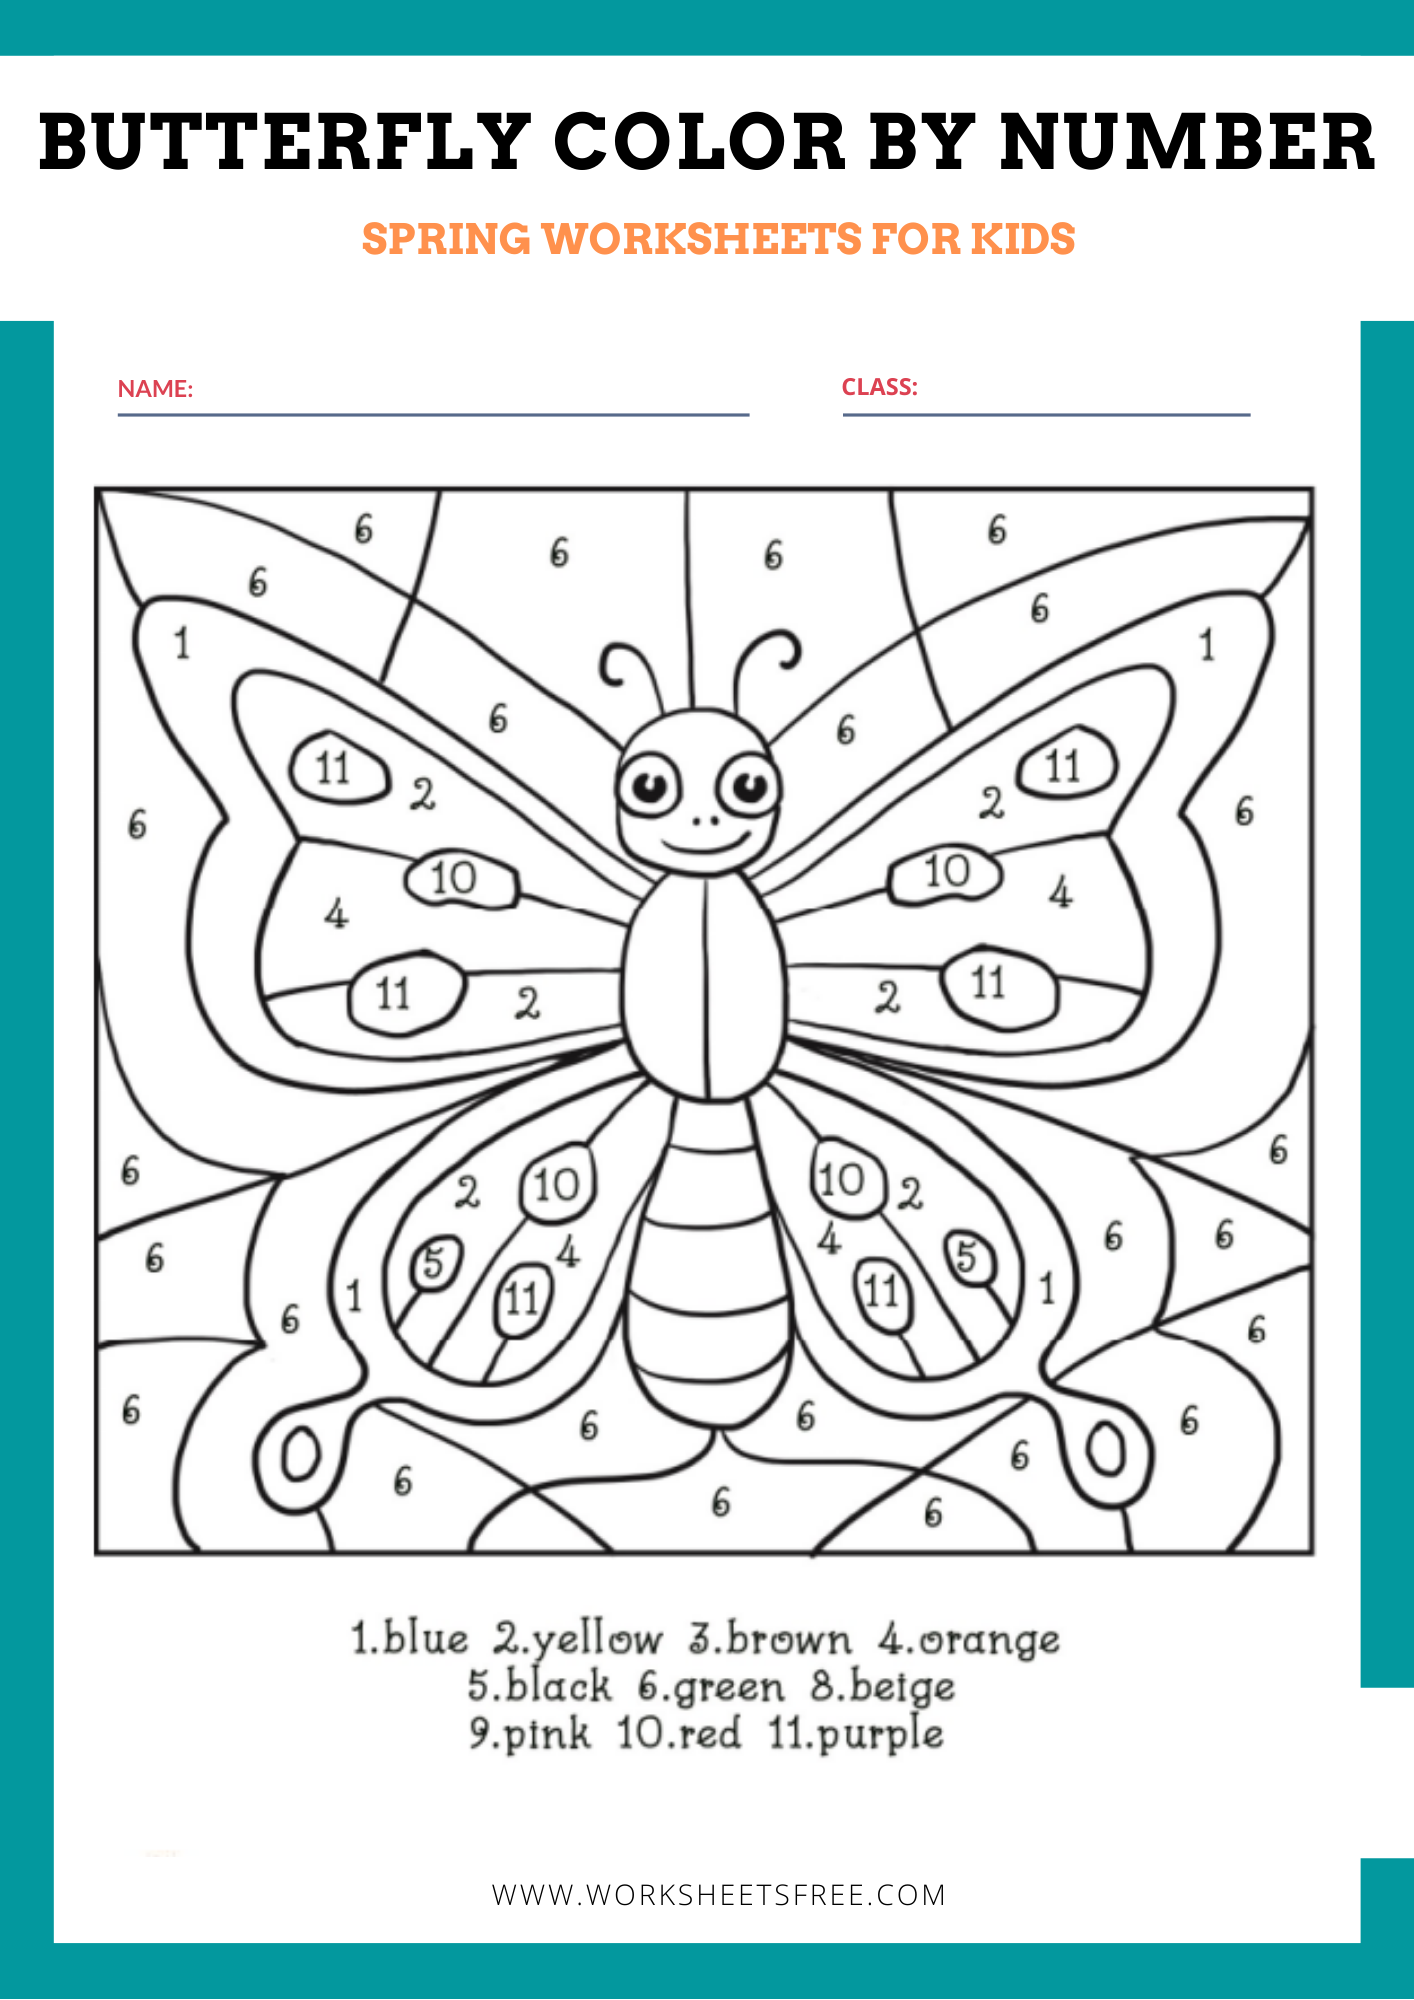 butterfly-color-by-number-worksheets-free